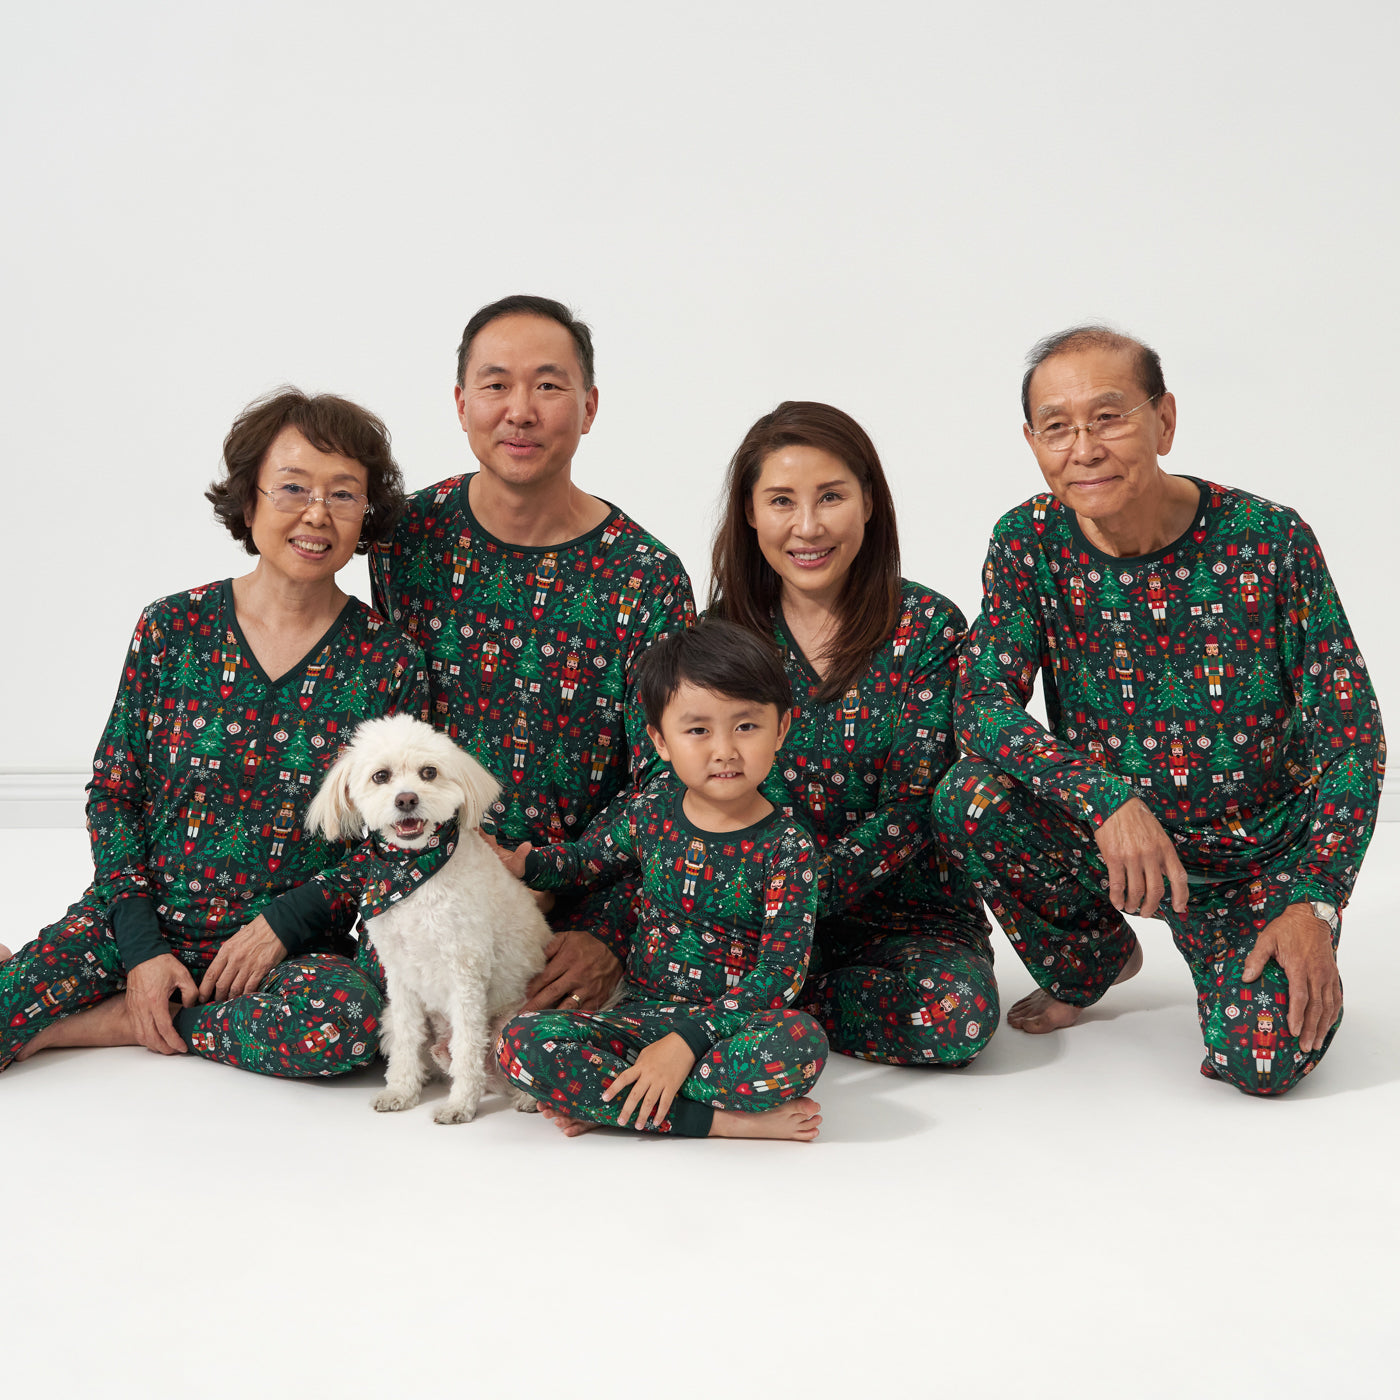 Family of five and their dog wearing matching Night at the Nutcracker Pajama sets. Mom and Grandma are wearing women's Night at the Nutcracker women's pajama tops and matching women's pajama bottoms. Dad and Grandpa are wearing Night at the Nutcracker men's pajama top and matching pajama bottoms. Child is wearing a Night at the Nutcracker two piece pajama set. Their dog is wearing a Night at the Nutcracker pet bandana